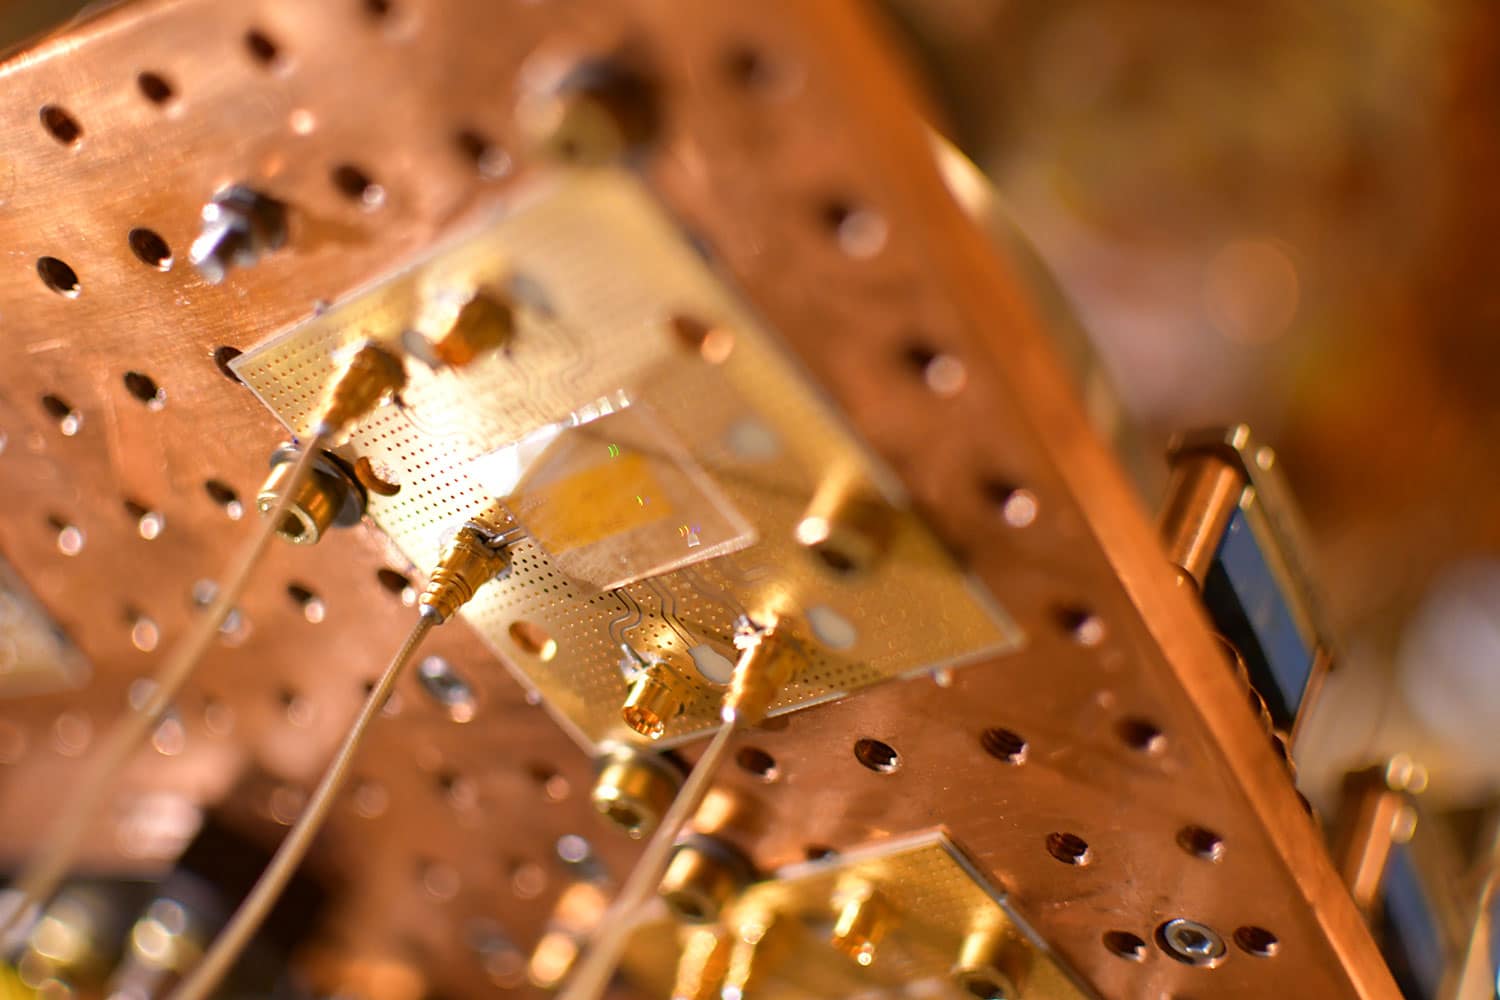 A chip that can control and modulate acoustic waves.